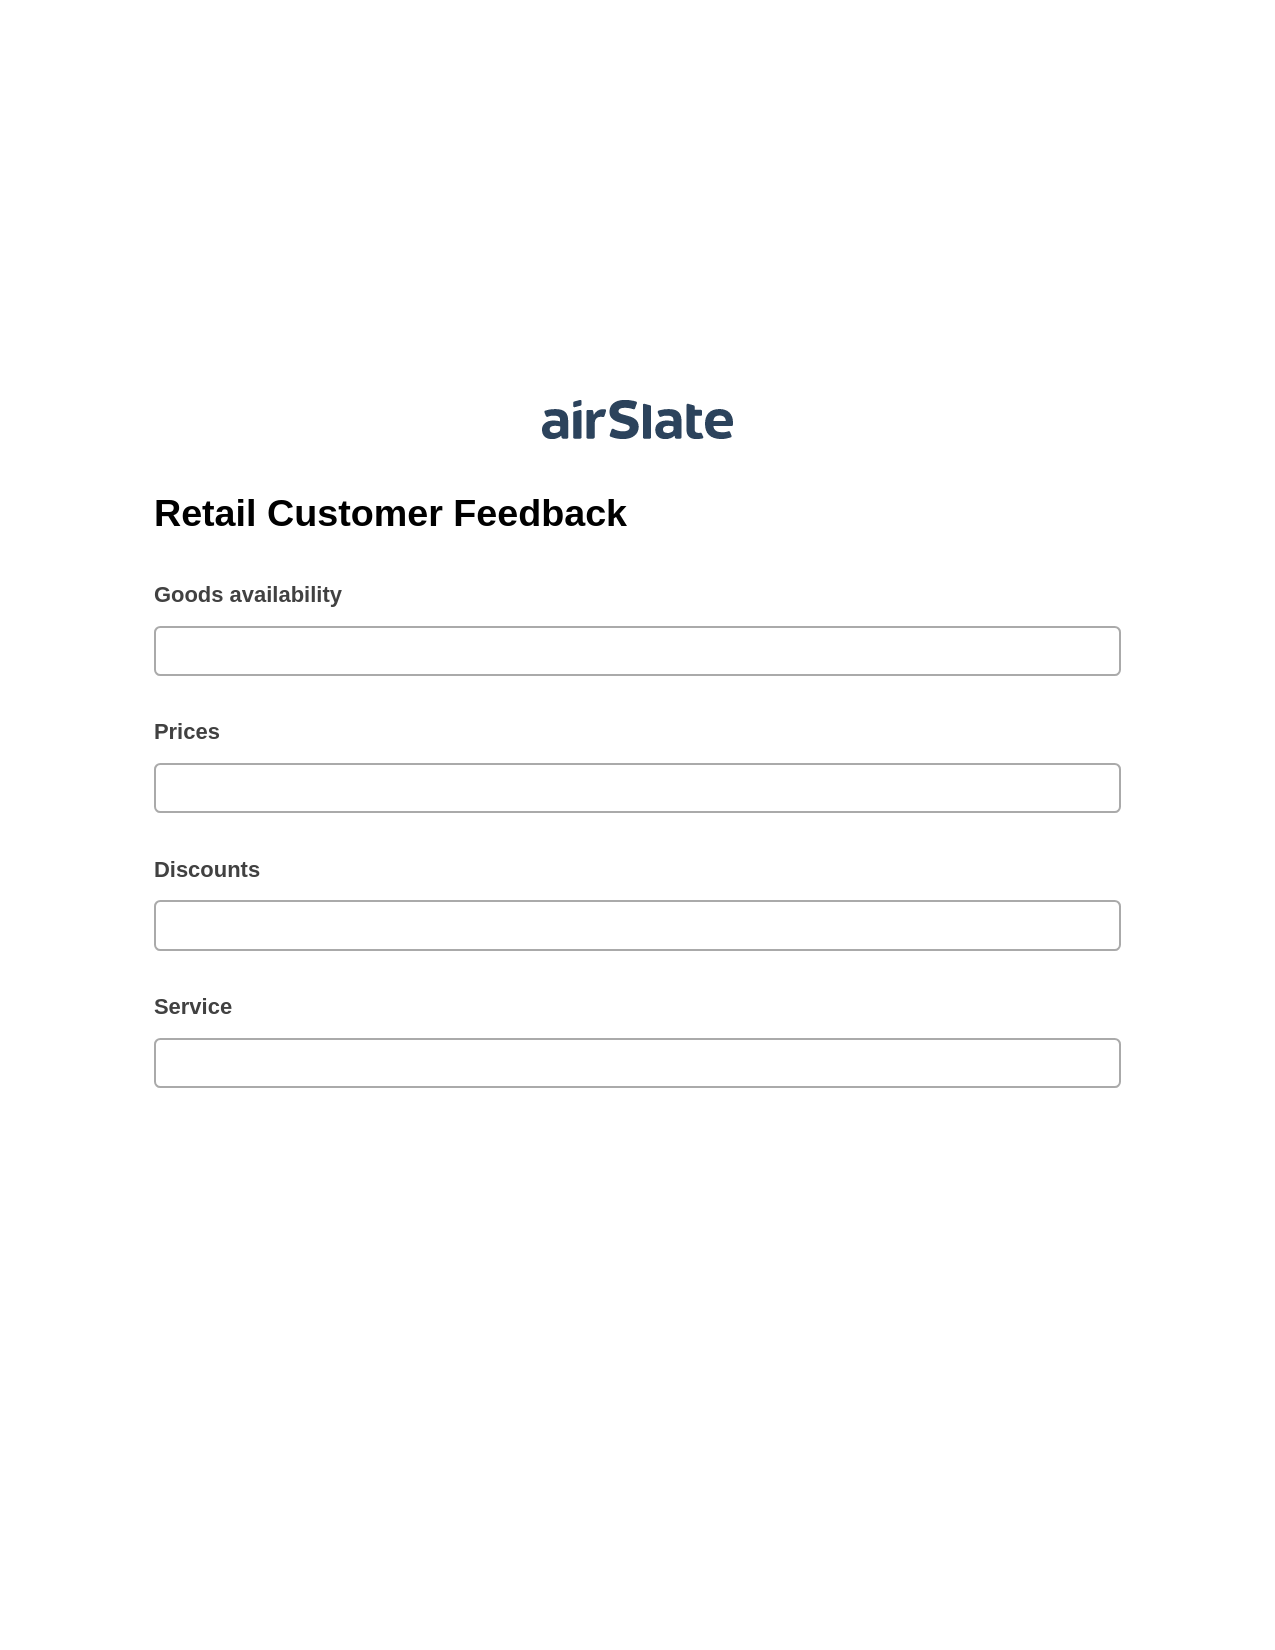 Retail Customer Feedback Pre-fill from another Slate Bot, Update NetSuite Records Bot, Export to Google Sheet Bot